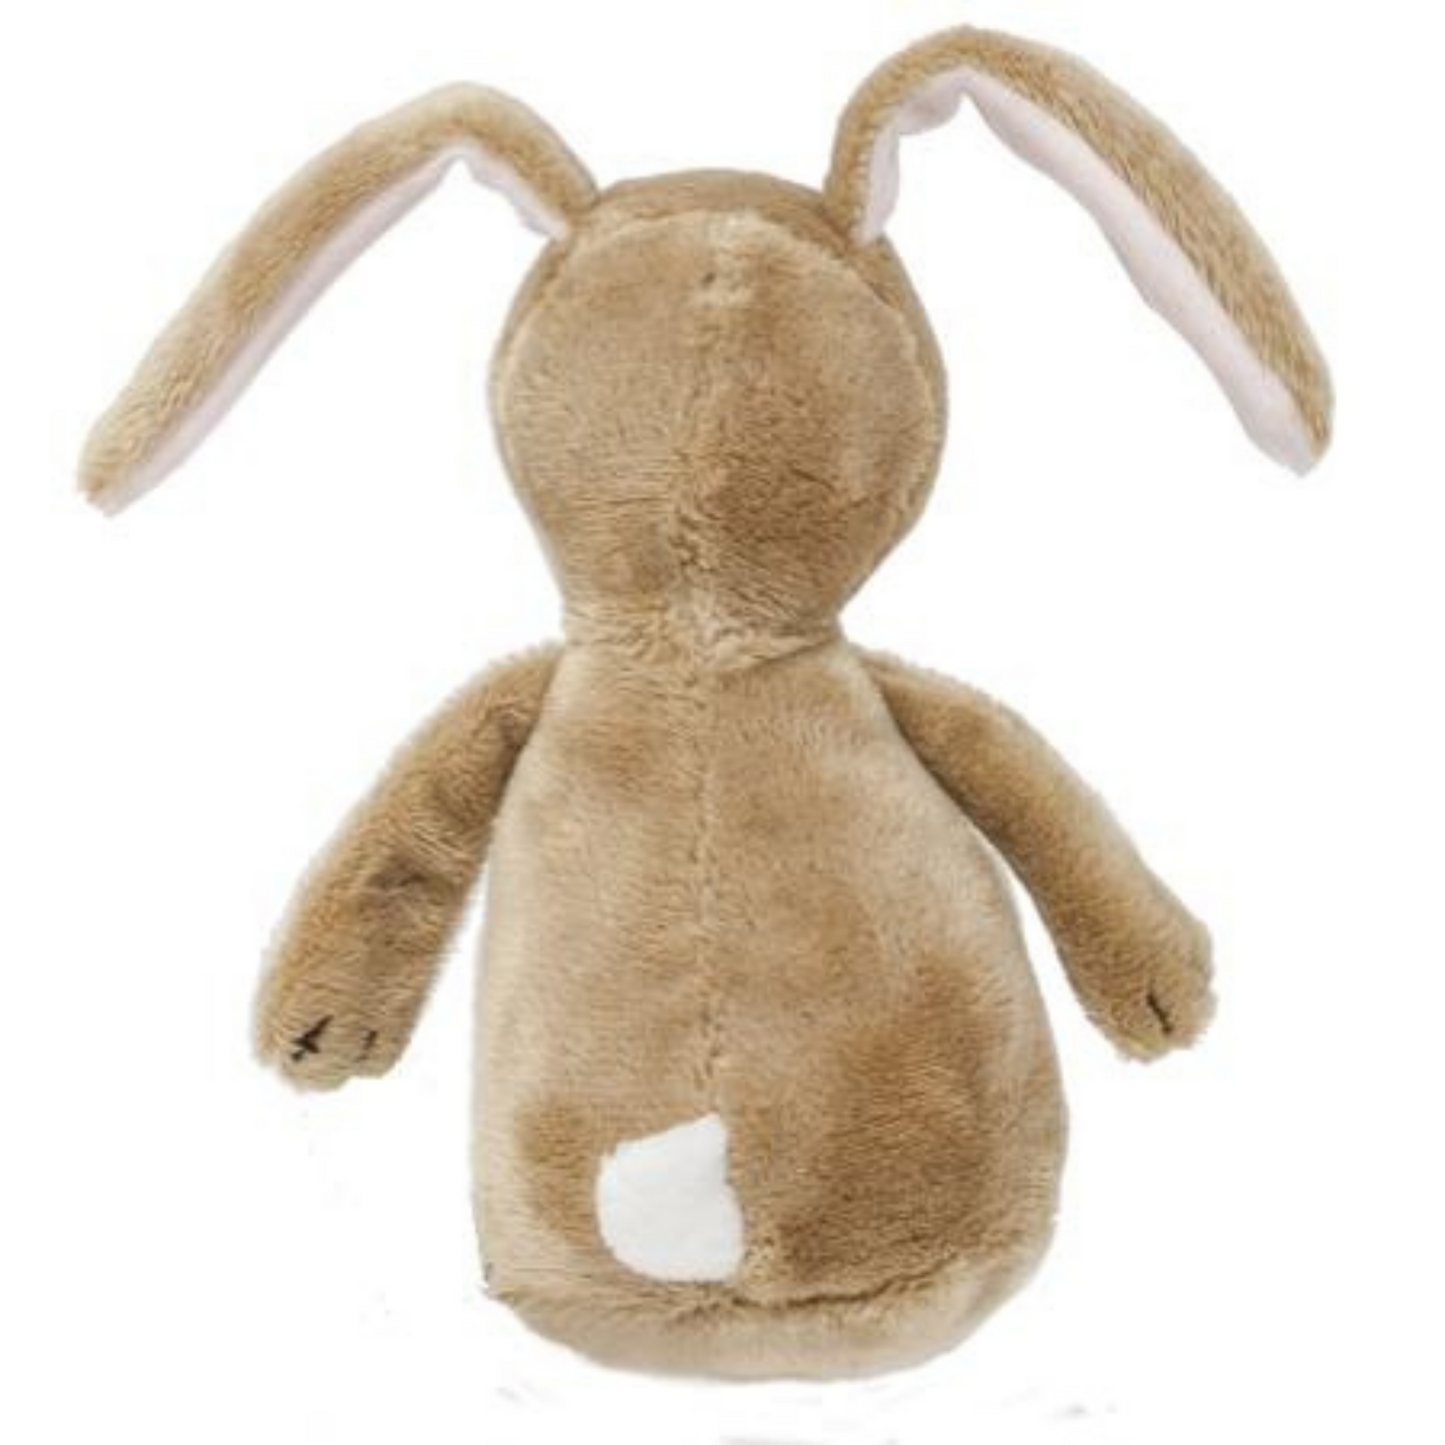 Guess How Much I Love You Little Nutbrown Hare Rattle